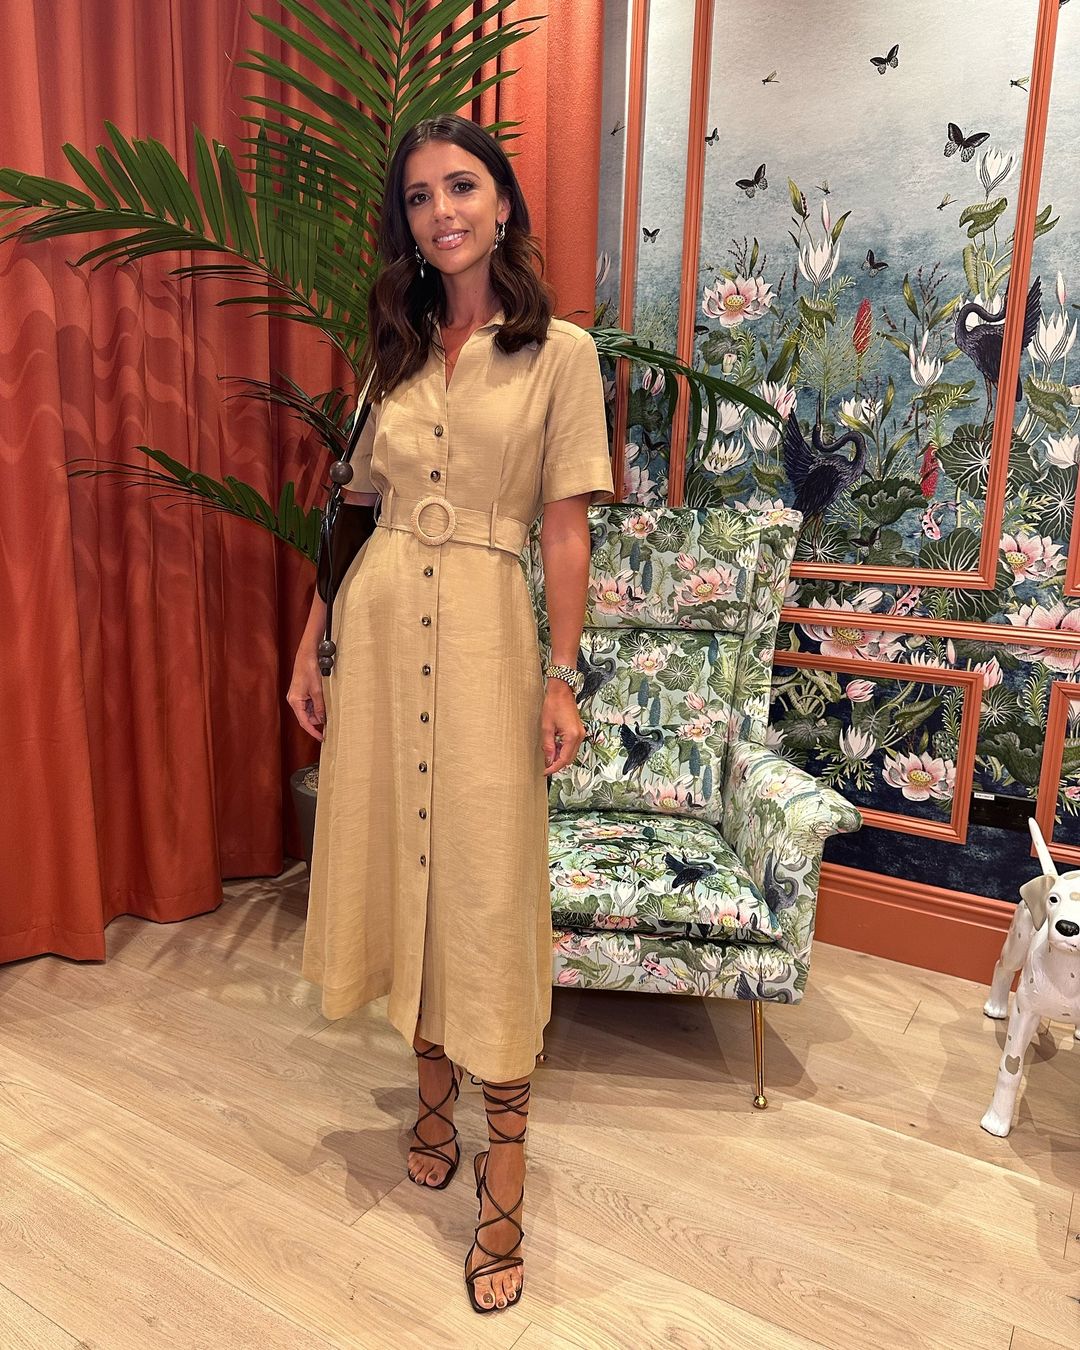 New Look’s new influencer-loved dress has shoppers ‘hitting the check quickly’